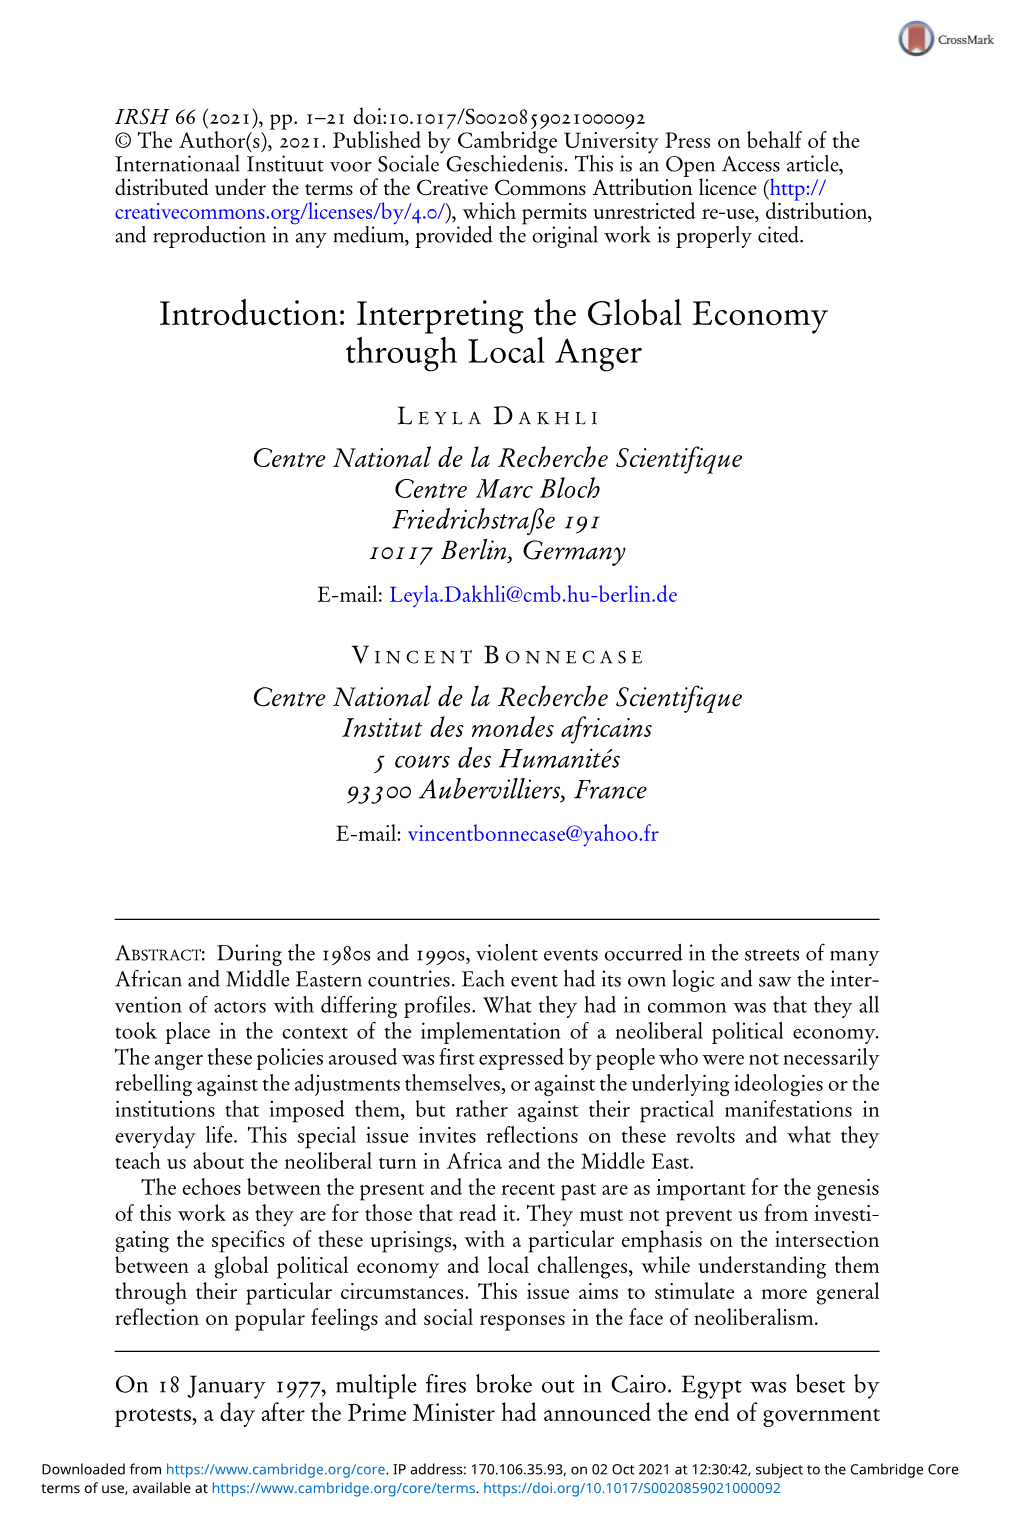 Introduction: Interpreting the Global Economy Through Local Anger